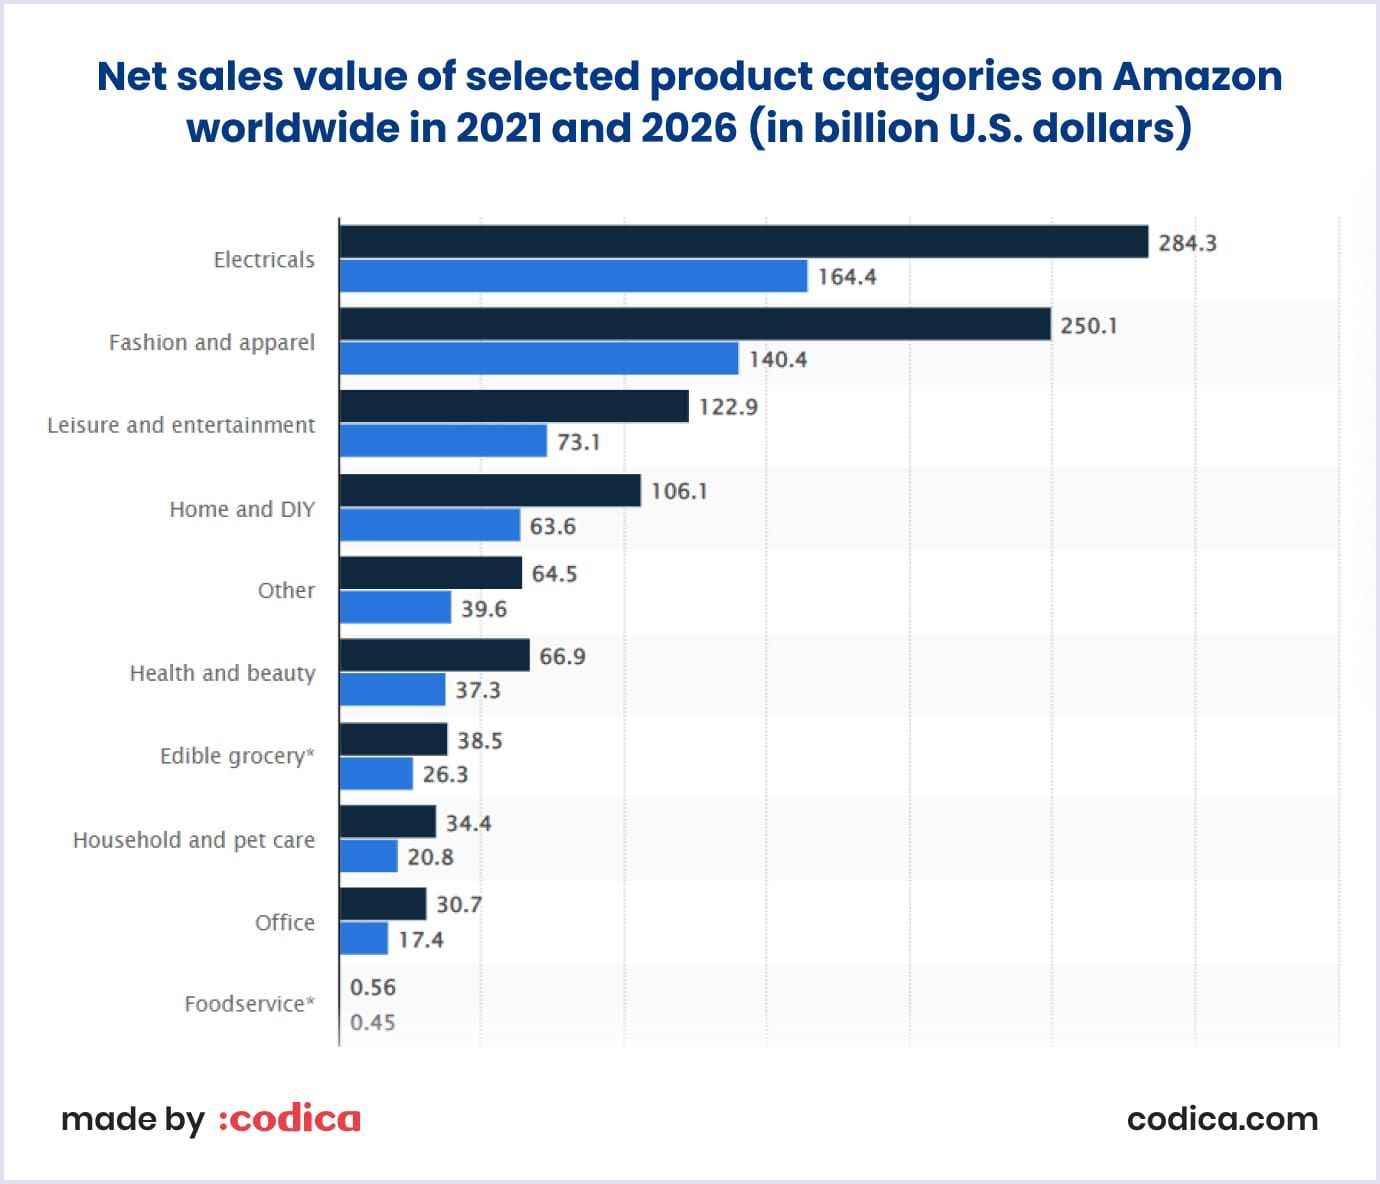 The most popular product categories on Amazon